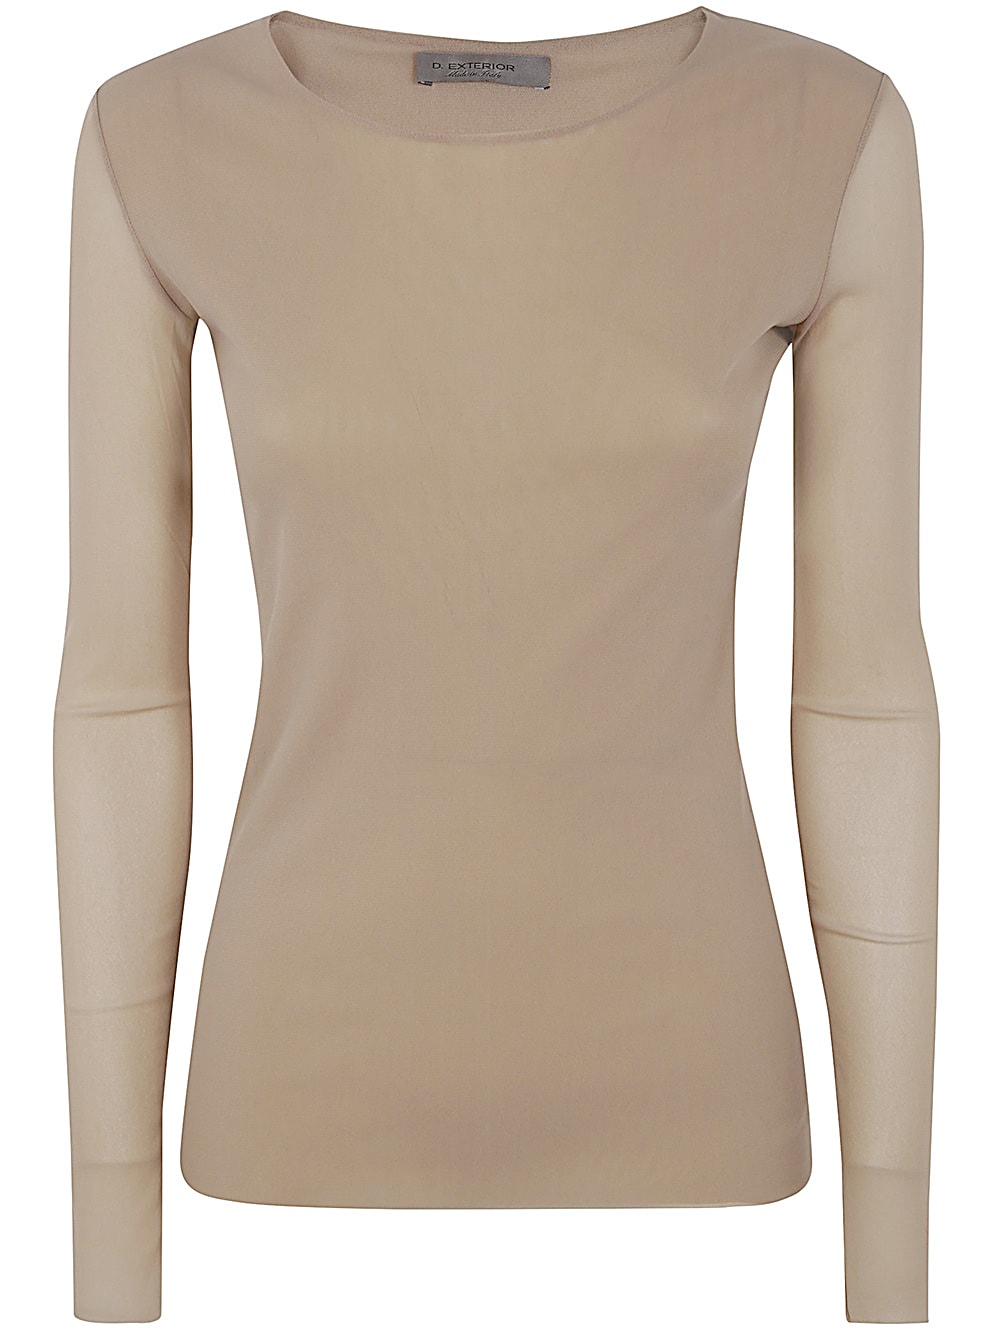 D. Exterior Tulle Round Neck Long Sleeves